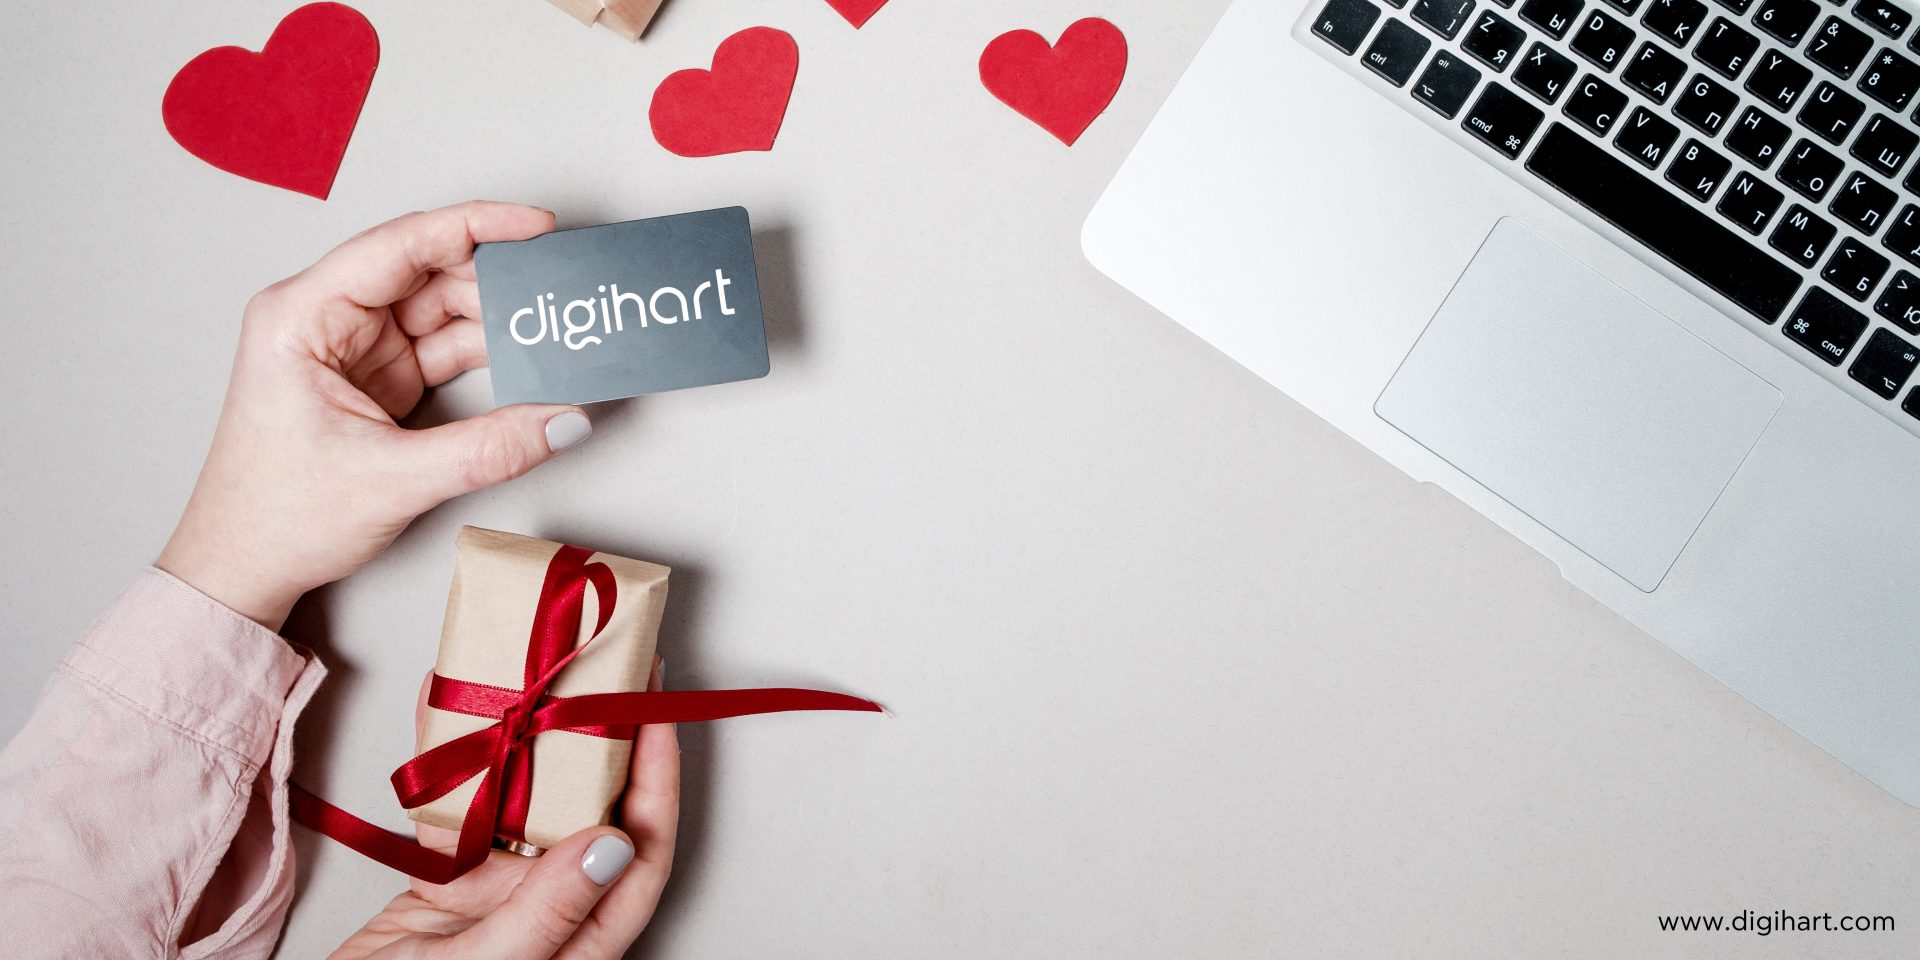 Valentine's Day Campaigns by Digihart. Digital Marketing for more sales.